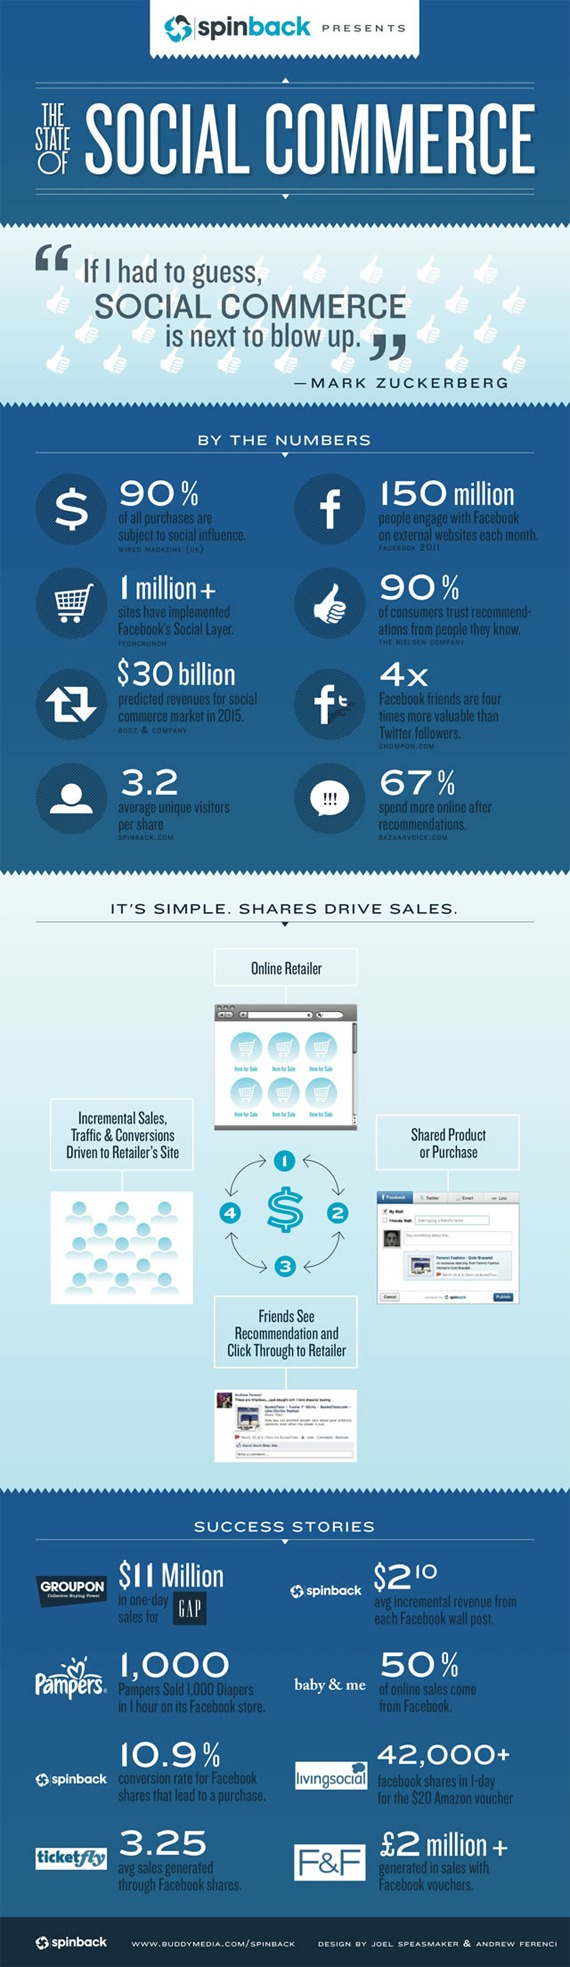 social-commerce-infographic